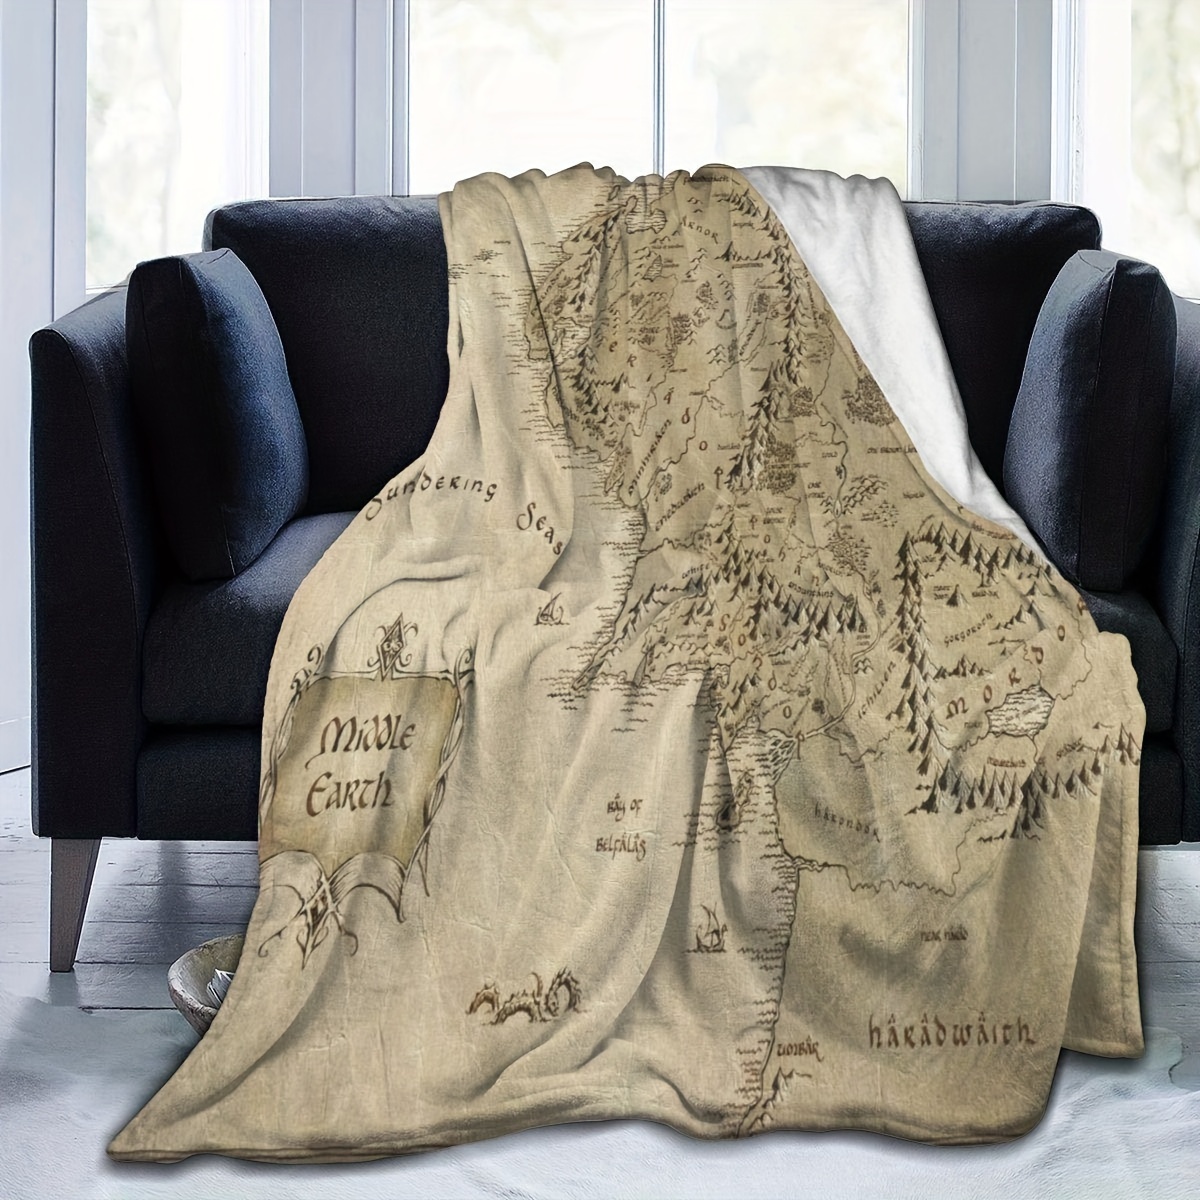 

1pc Creative Blanket Middle Earth Map Throw Blanket Ultra Soft Blanket Lightweight Bed Blanket Quilt Durable Home Decor Blanket